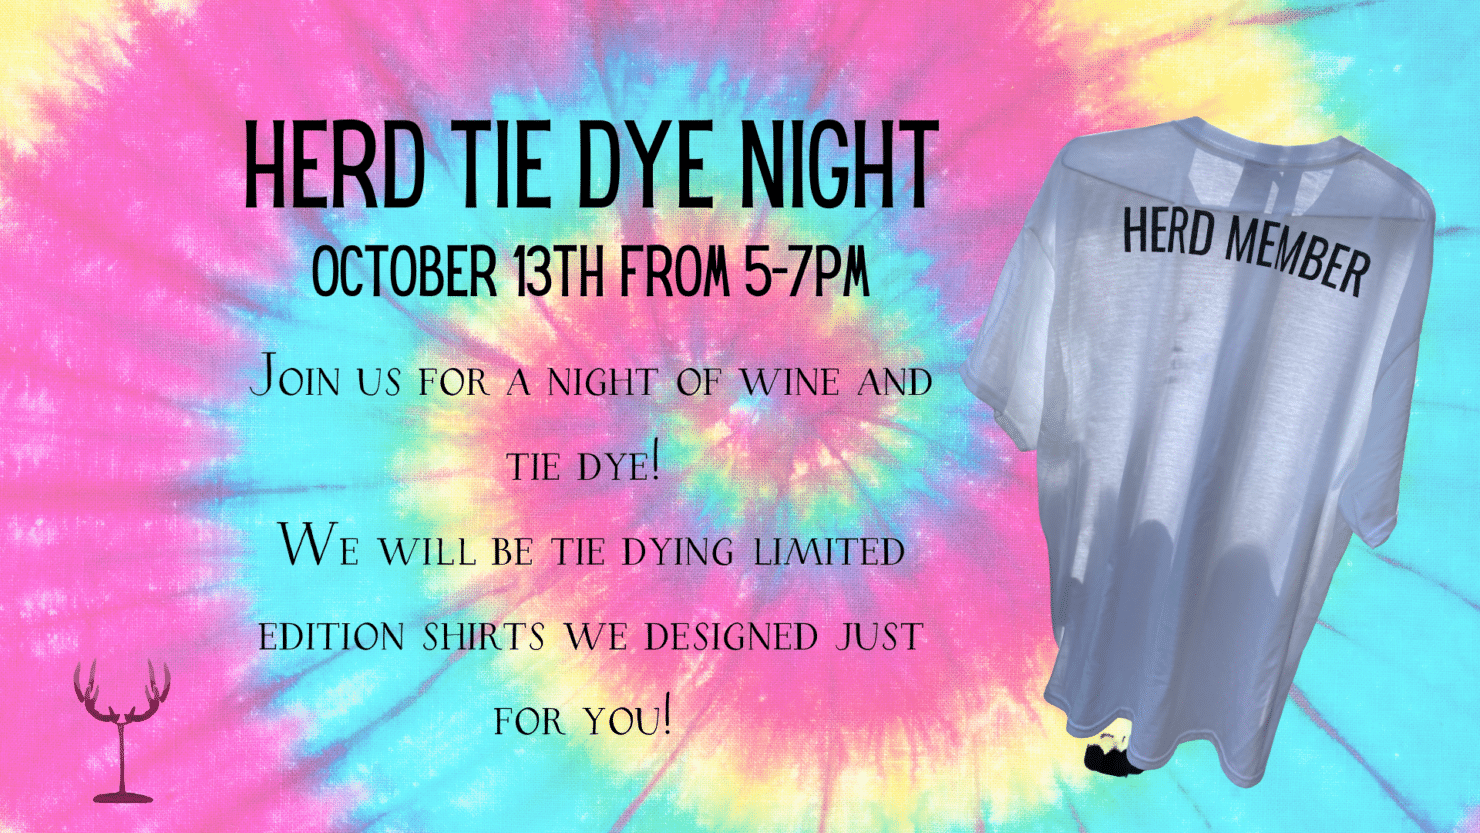 Herd Tie Dye Night at Timber Hill Winery